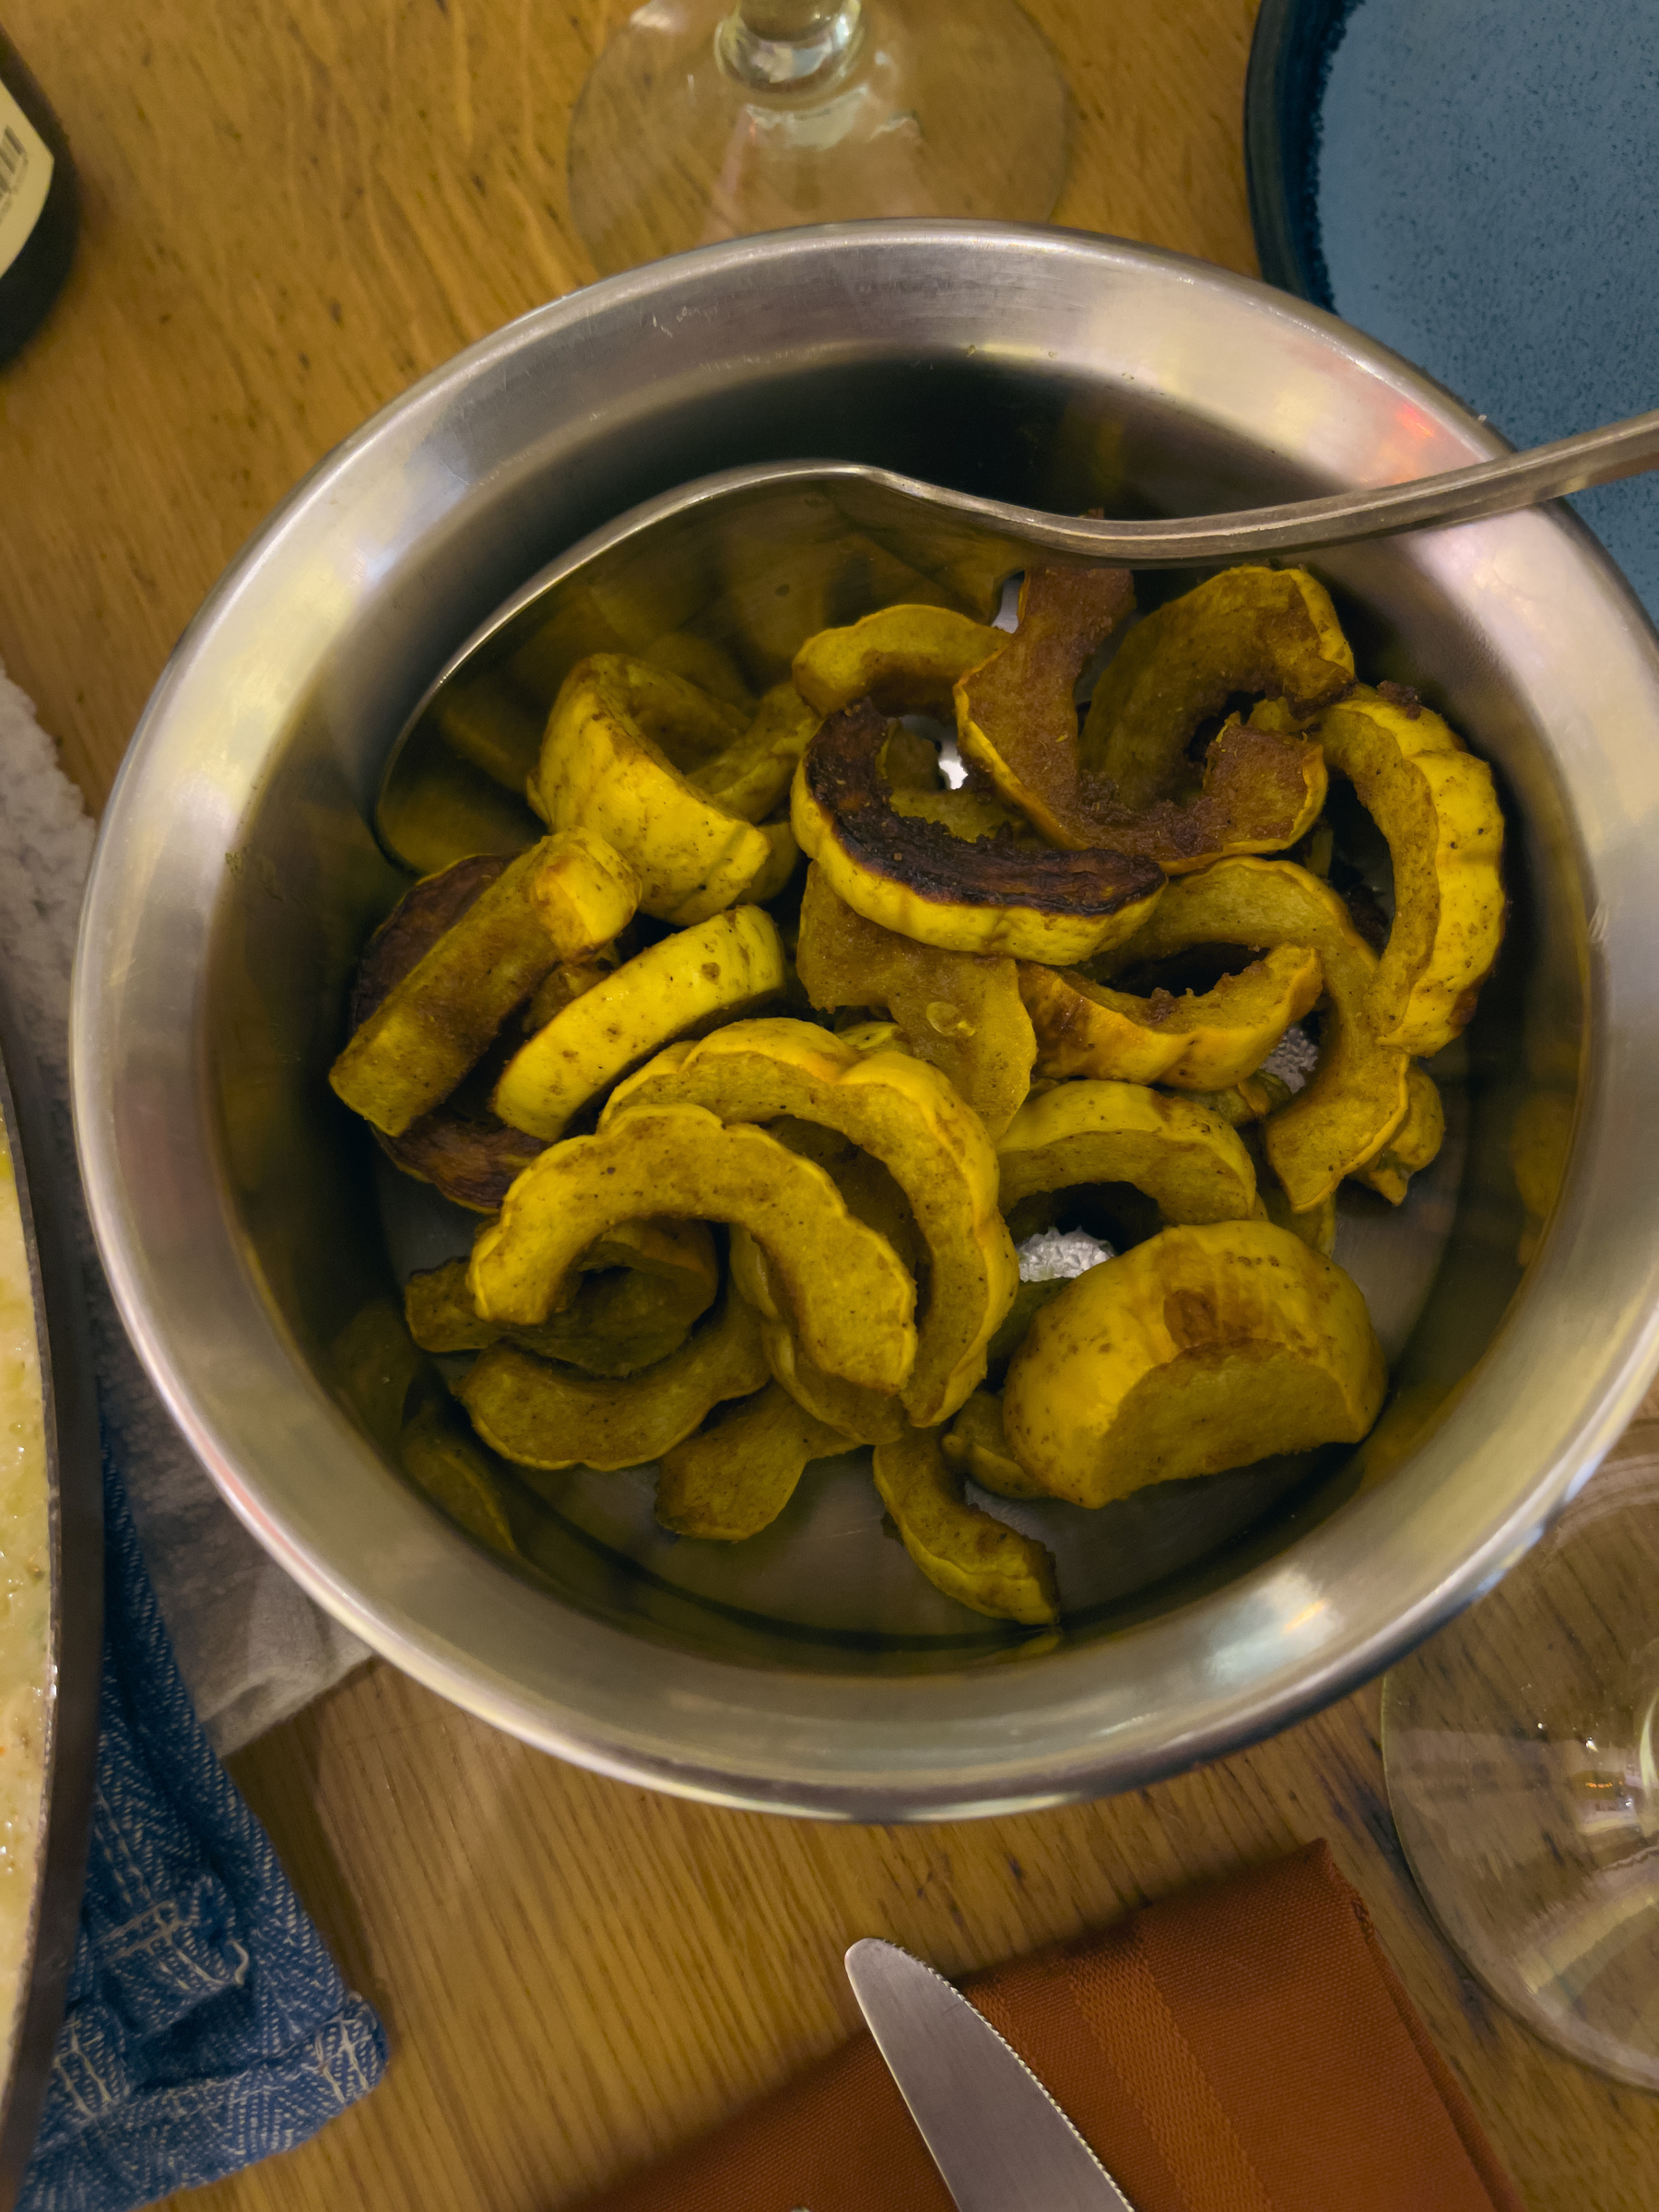 Half moon pieces of delicata squash roasted with curry powder. Served in a circular metal bowl.